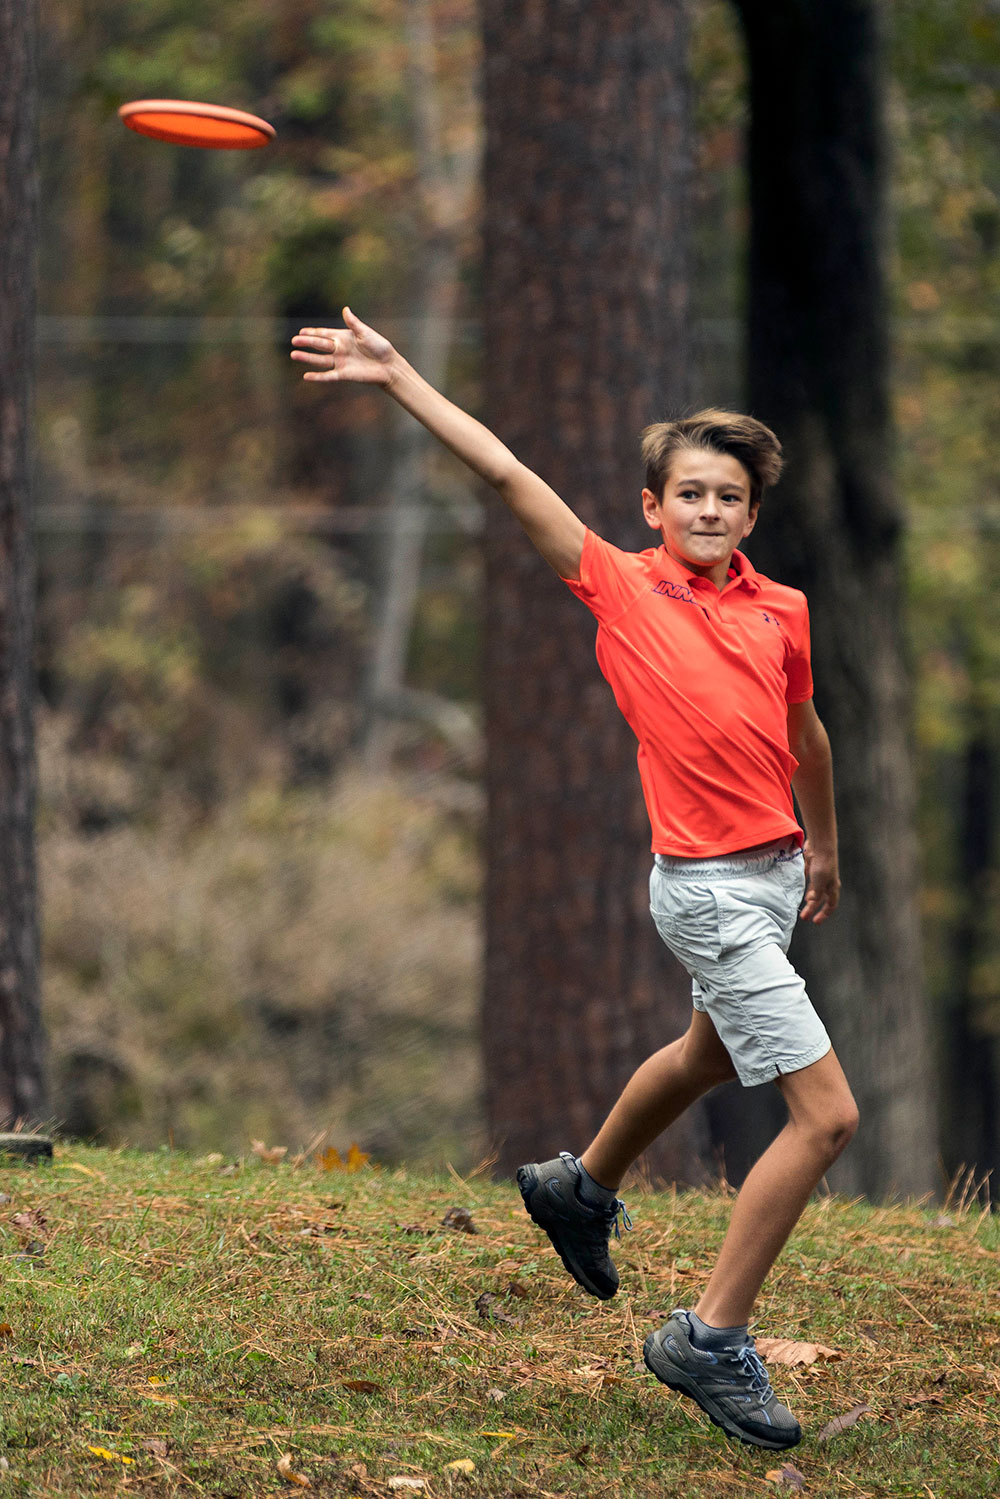 James and Oliver Beavers, ages 11 and 10, are competitive players for their ages. Oliver was recently crowned 2022's PDGA Junior World Champion in the under 10 age group.